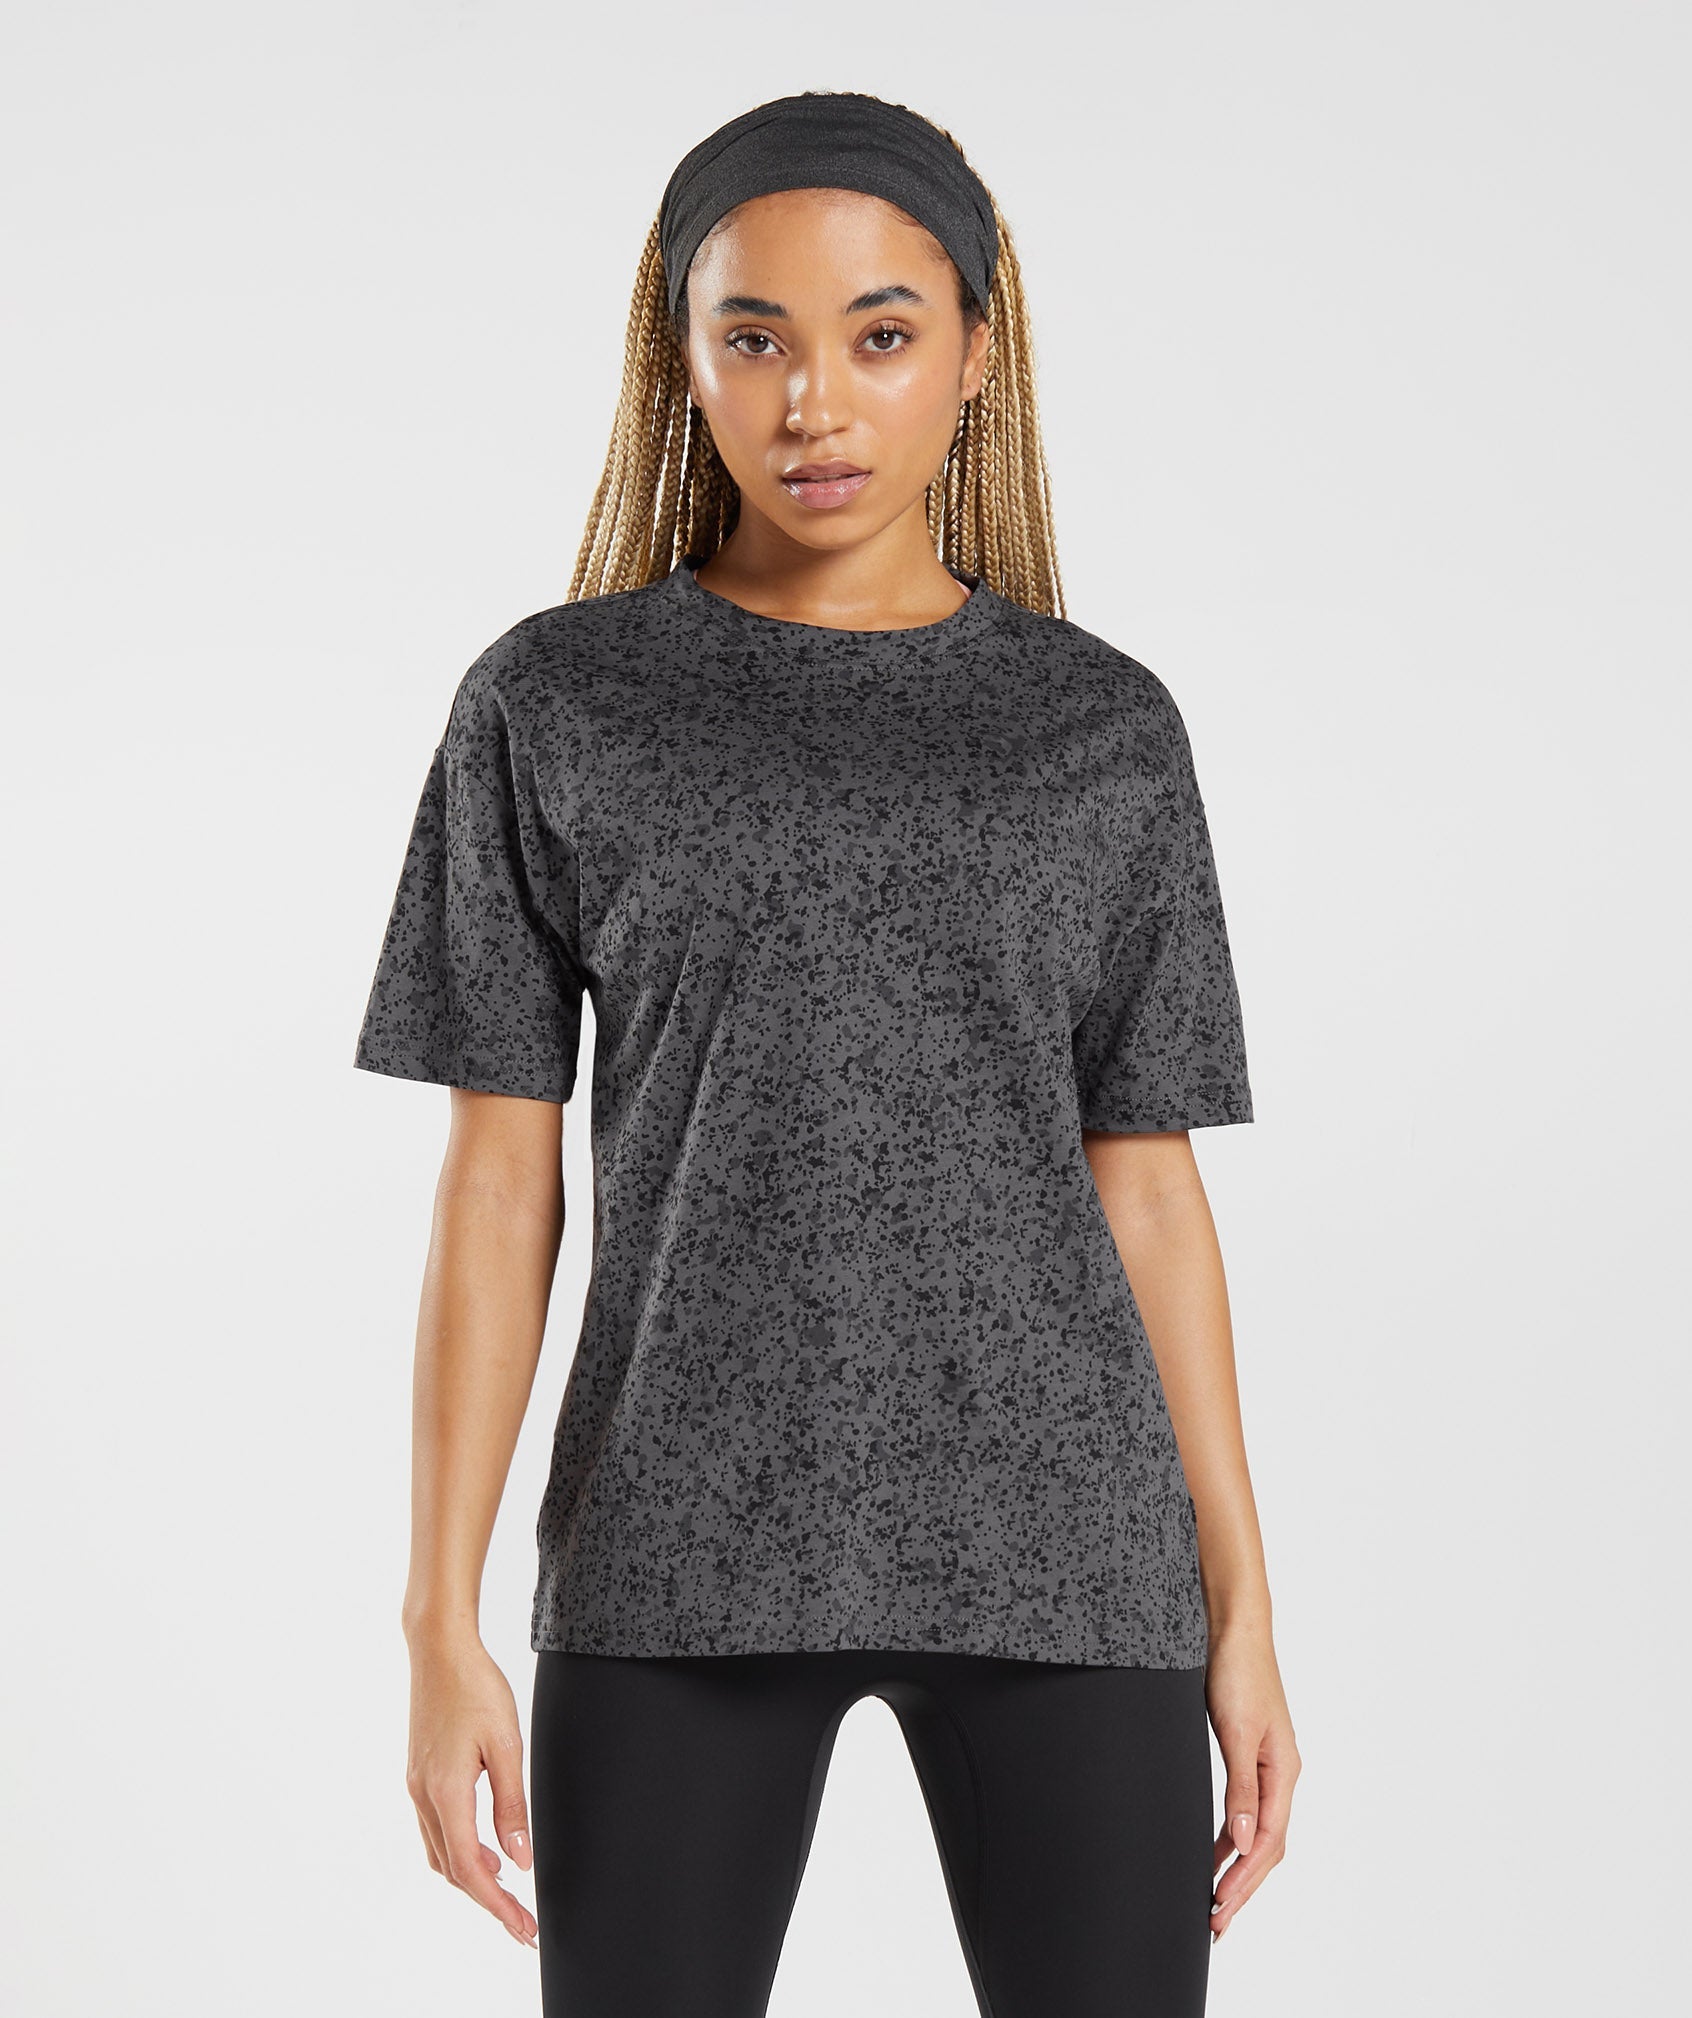 Mineral Print T-Shirt in Silhouette Grey